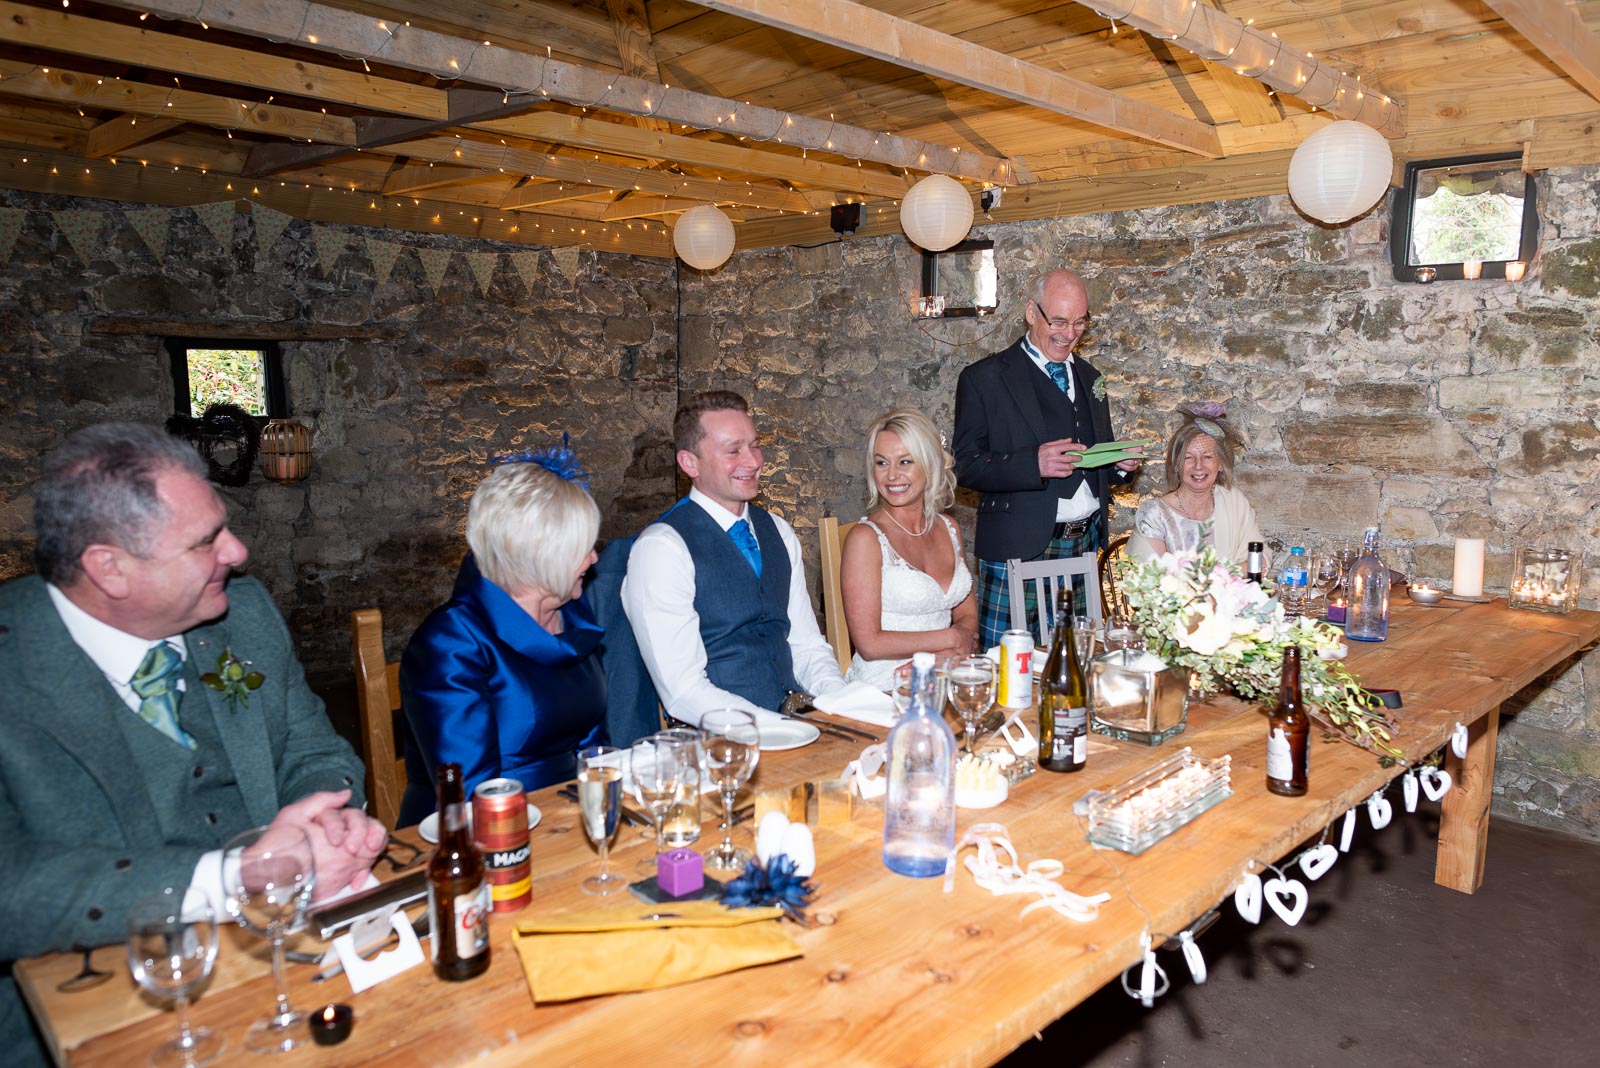 Te top table at Lewis and Eilidh's wedding.